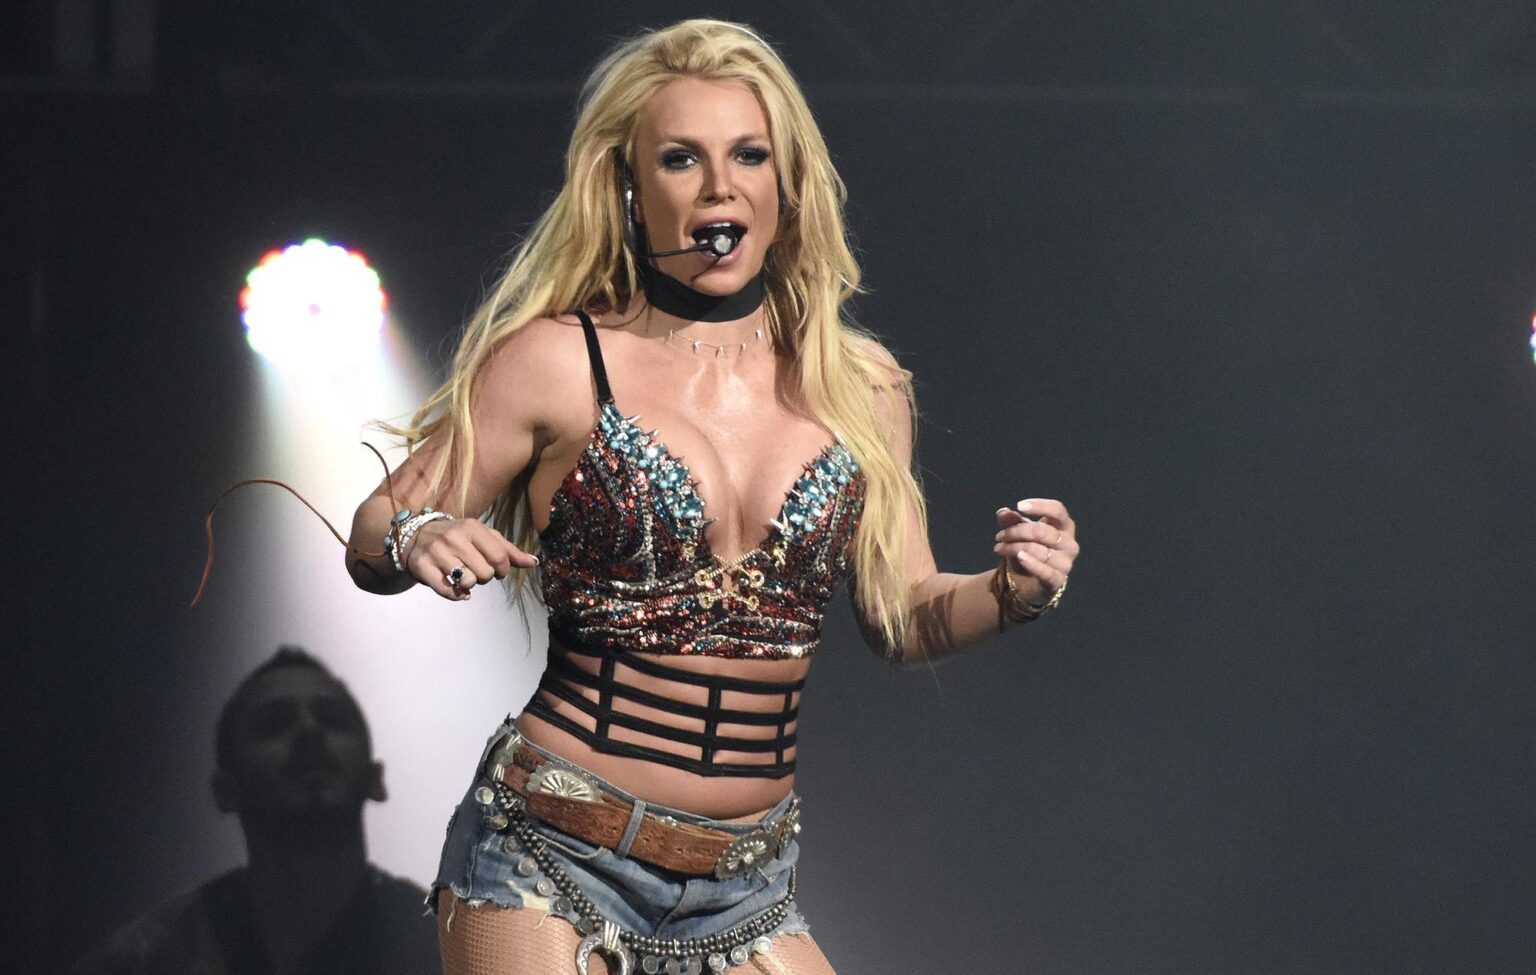 Britney Spears has delivered some iconic music videos over the past twenty years, and we sure hope she puts out more in the future. Here's our favorites!